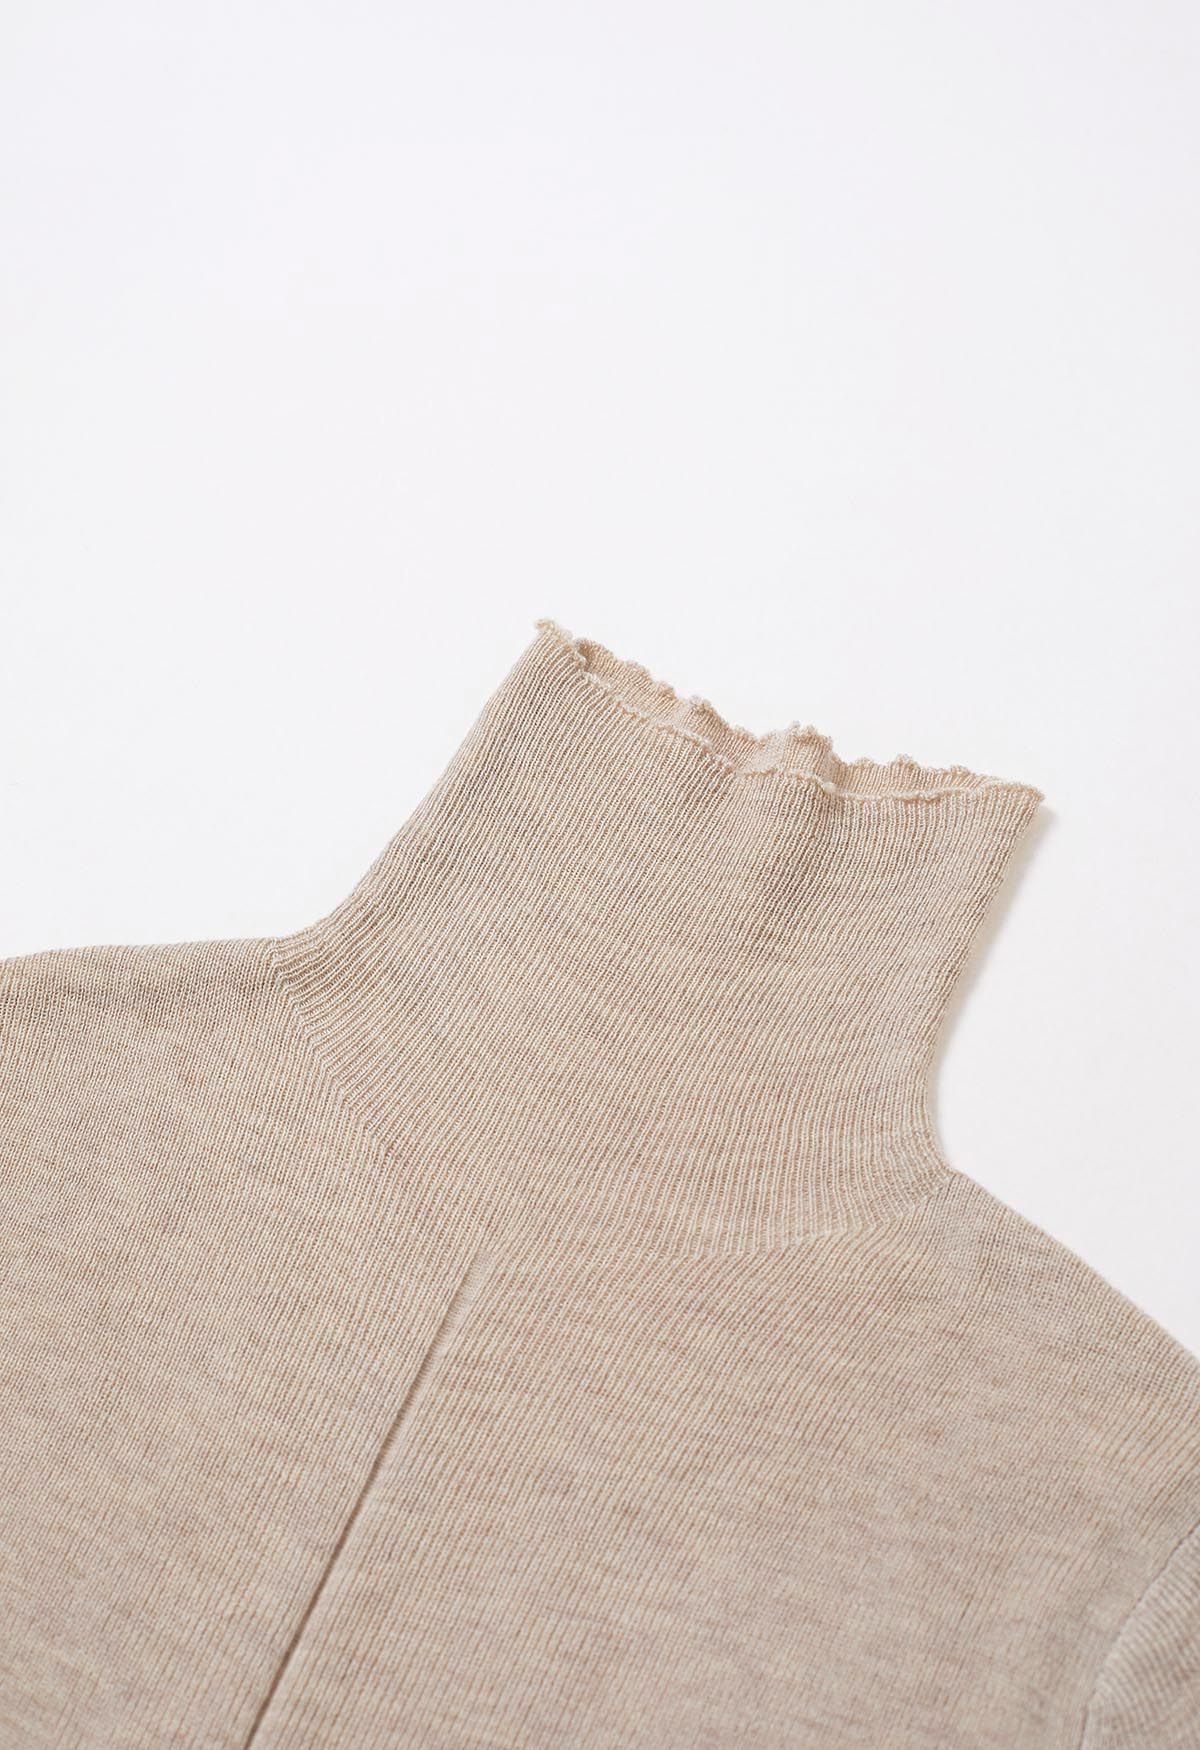 Basic High Neck Soft Knit Top in Light Tan